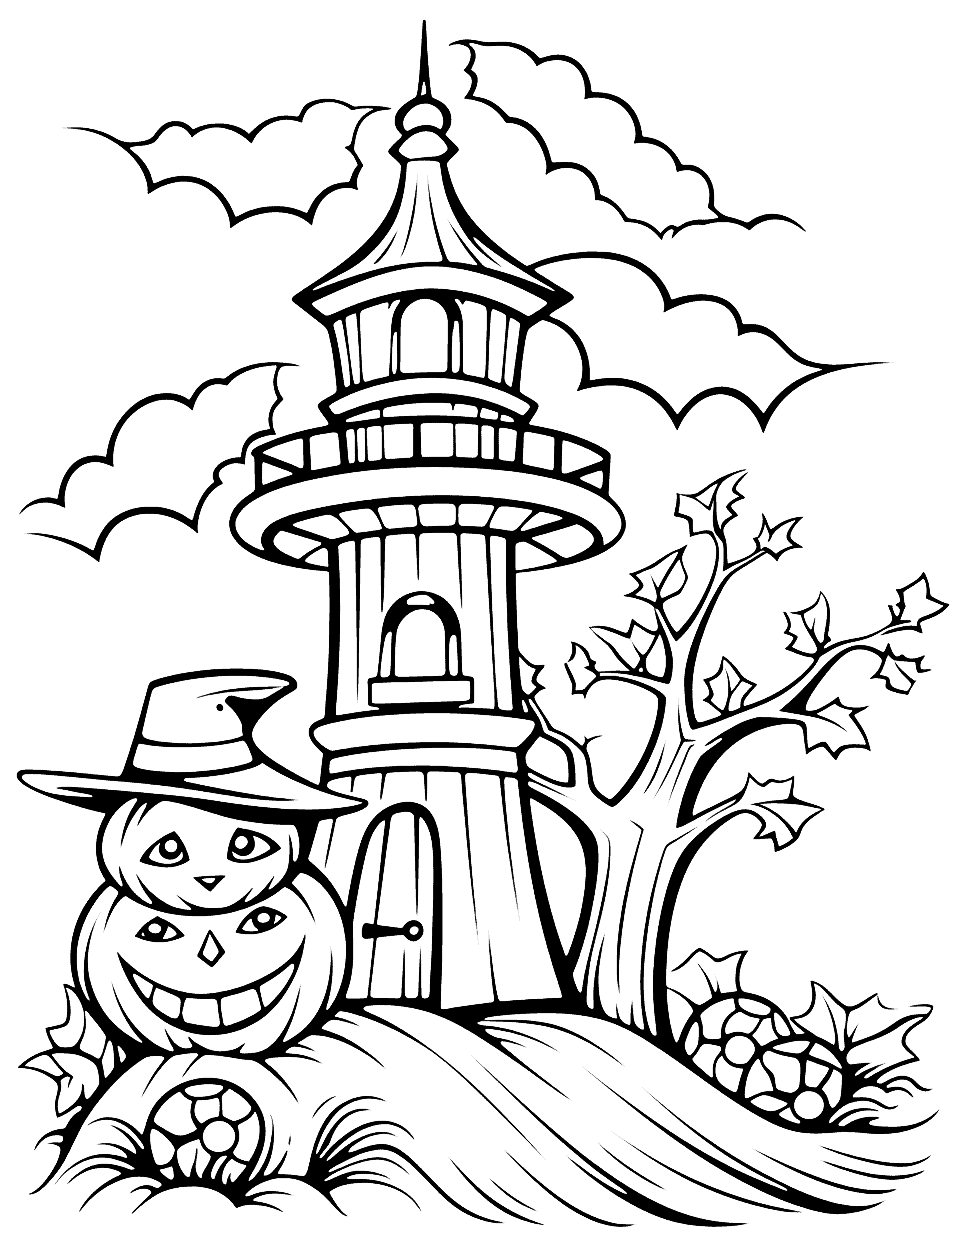 Spooky Lighthouse Halloween Coloring Page - A haunted lighthouse on a cliff, with ghostly figures.